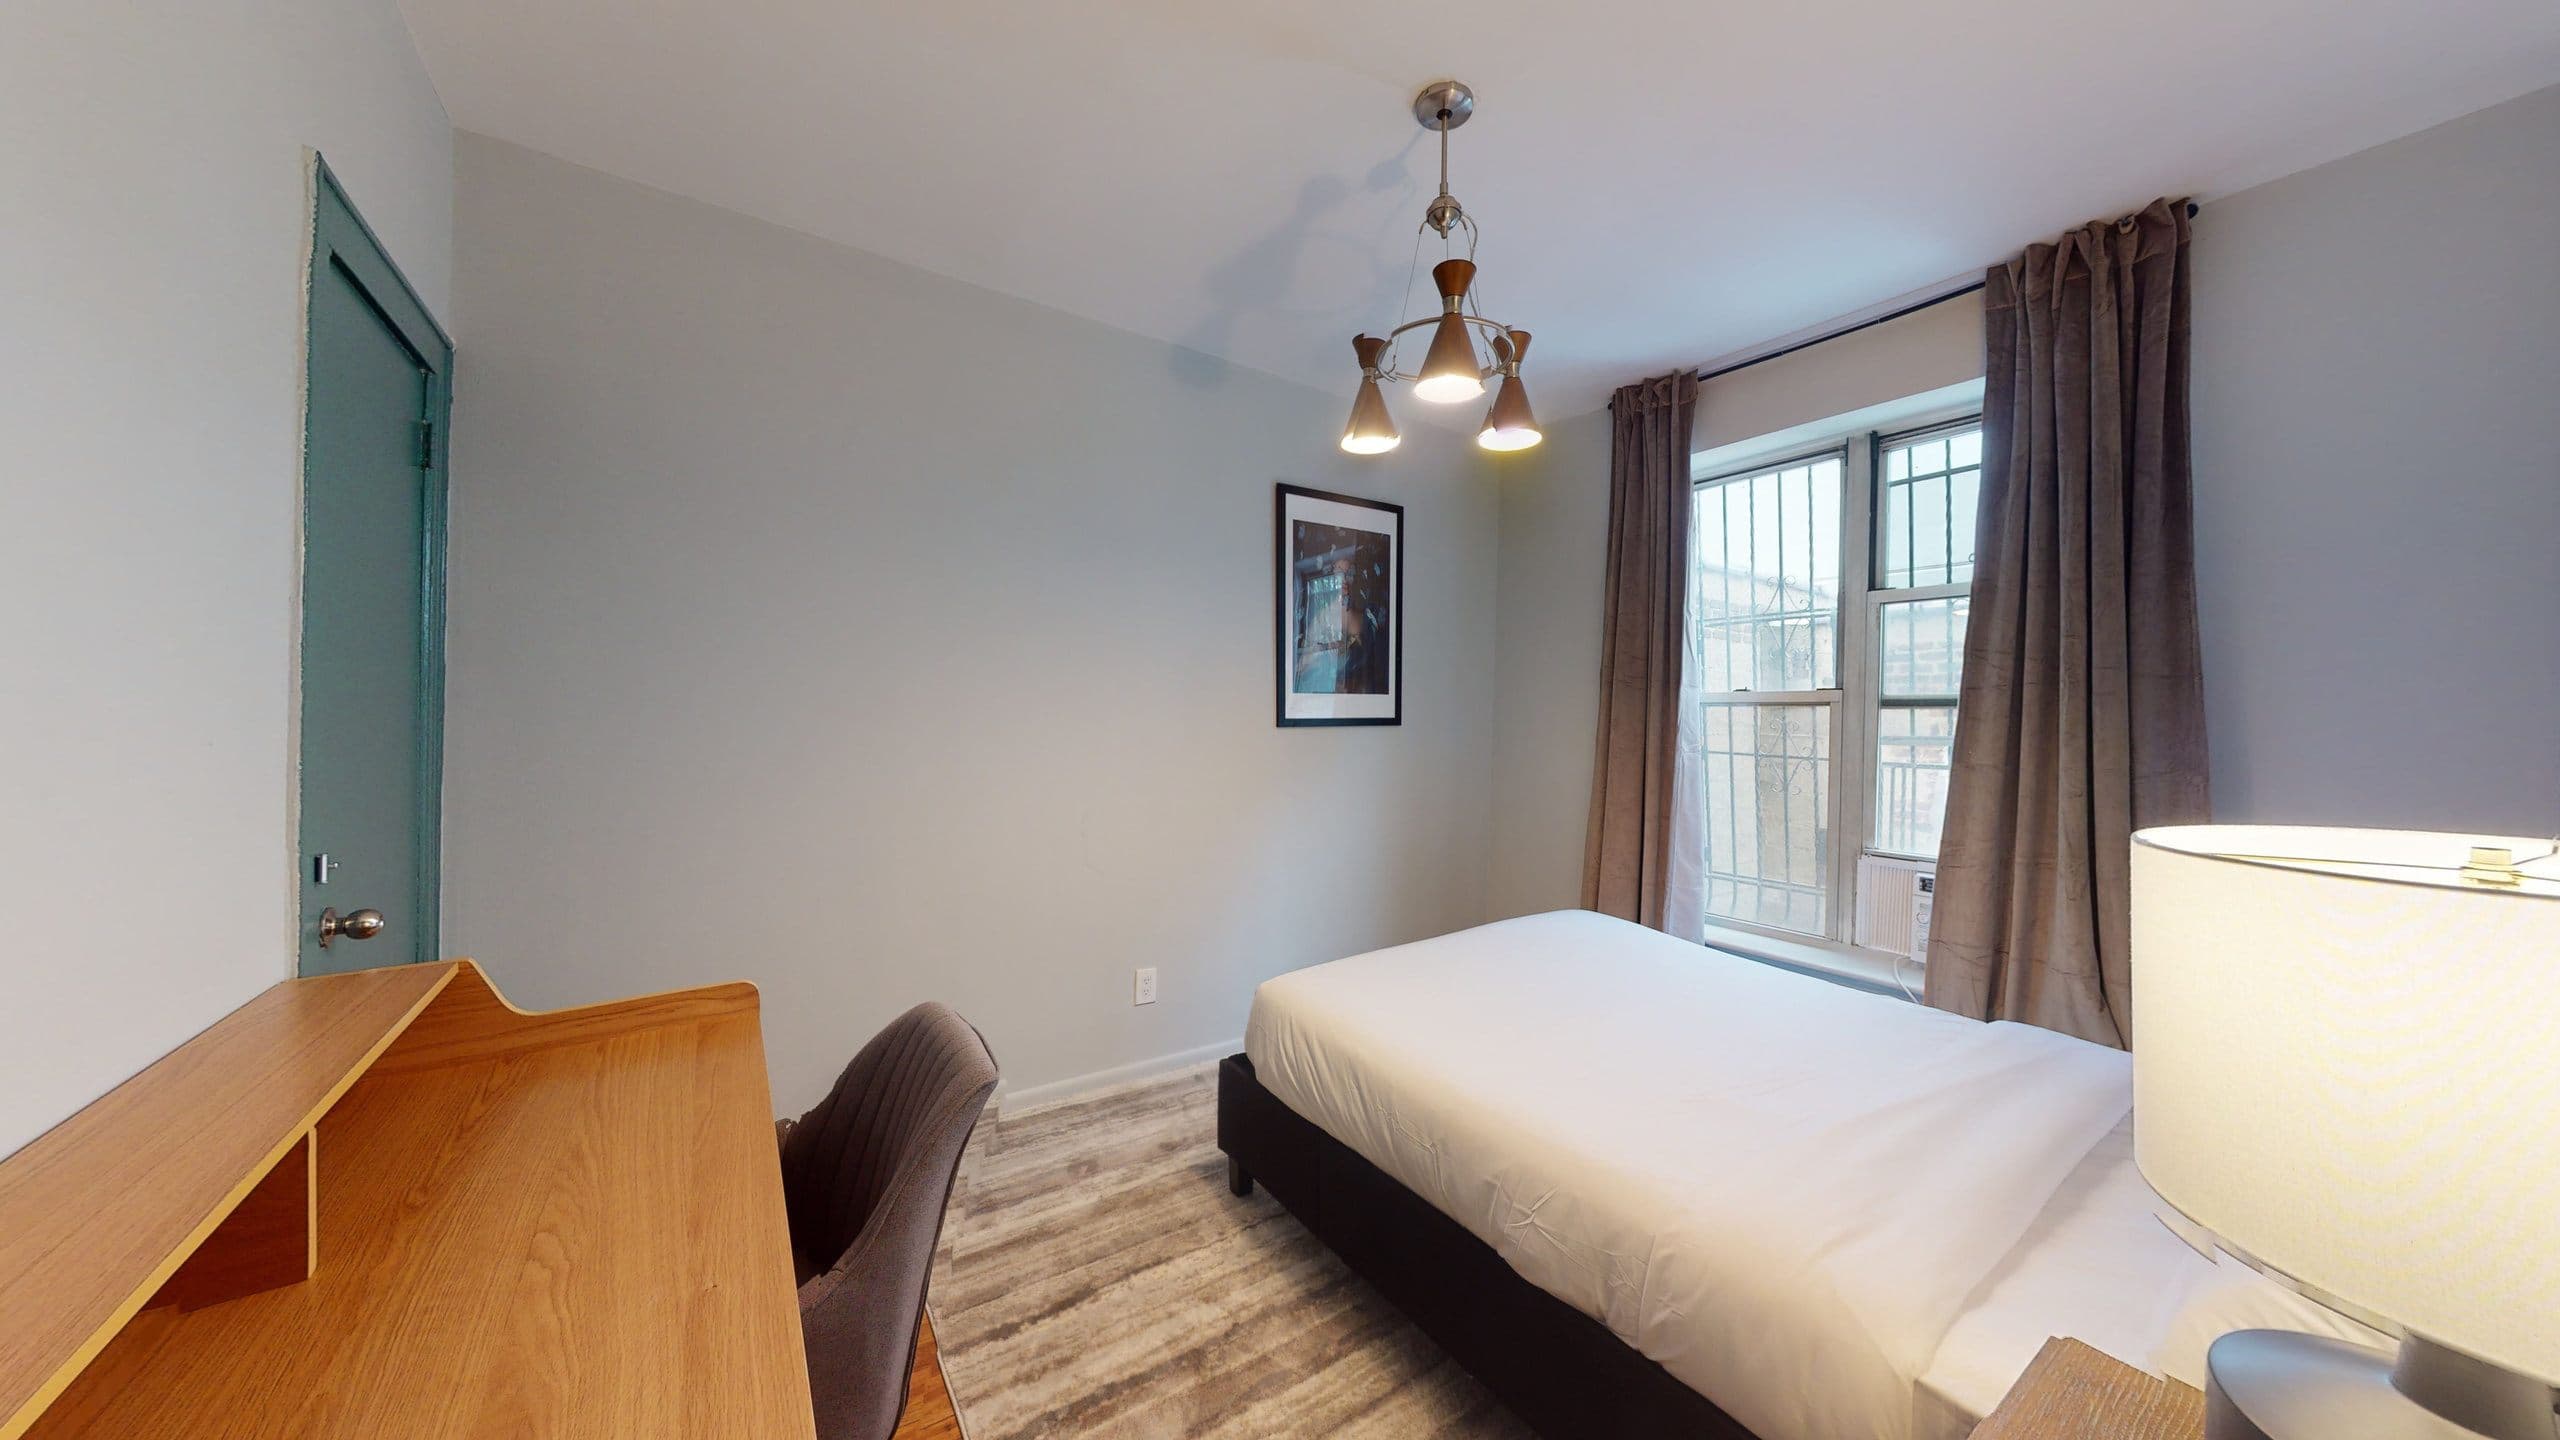 Photo 26 of #1227: Queen Bedroom A at June Homes